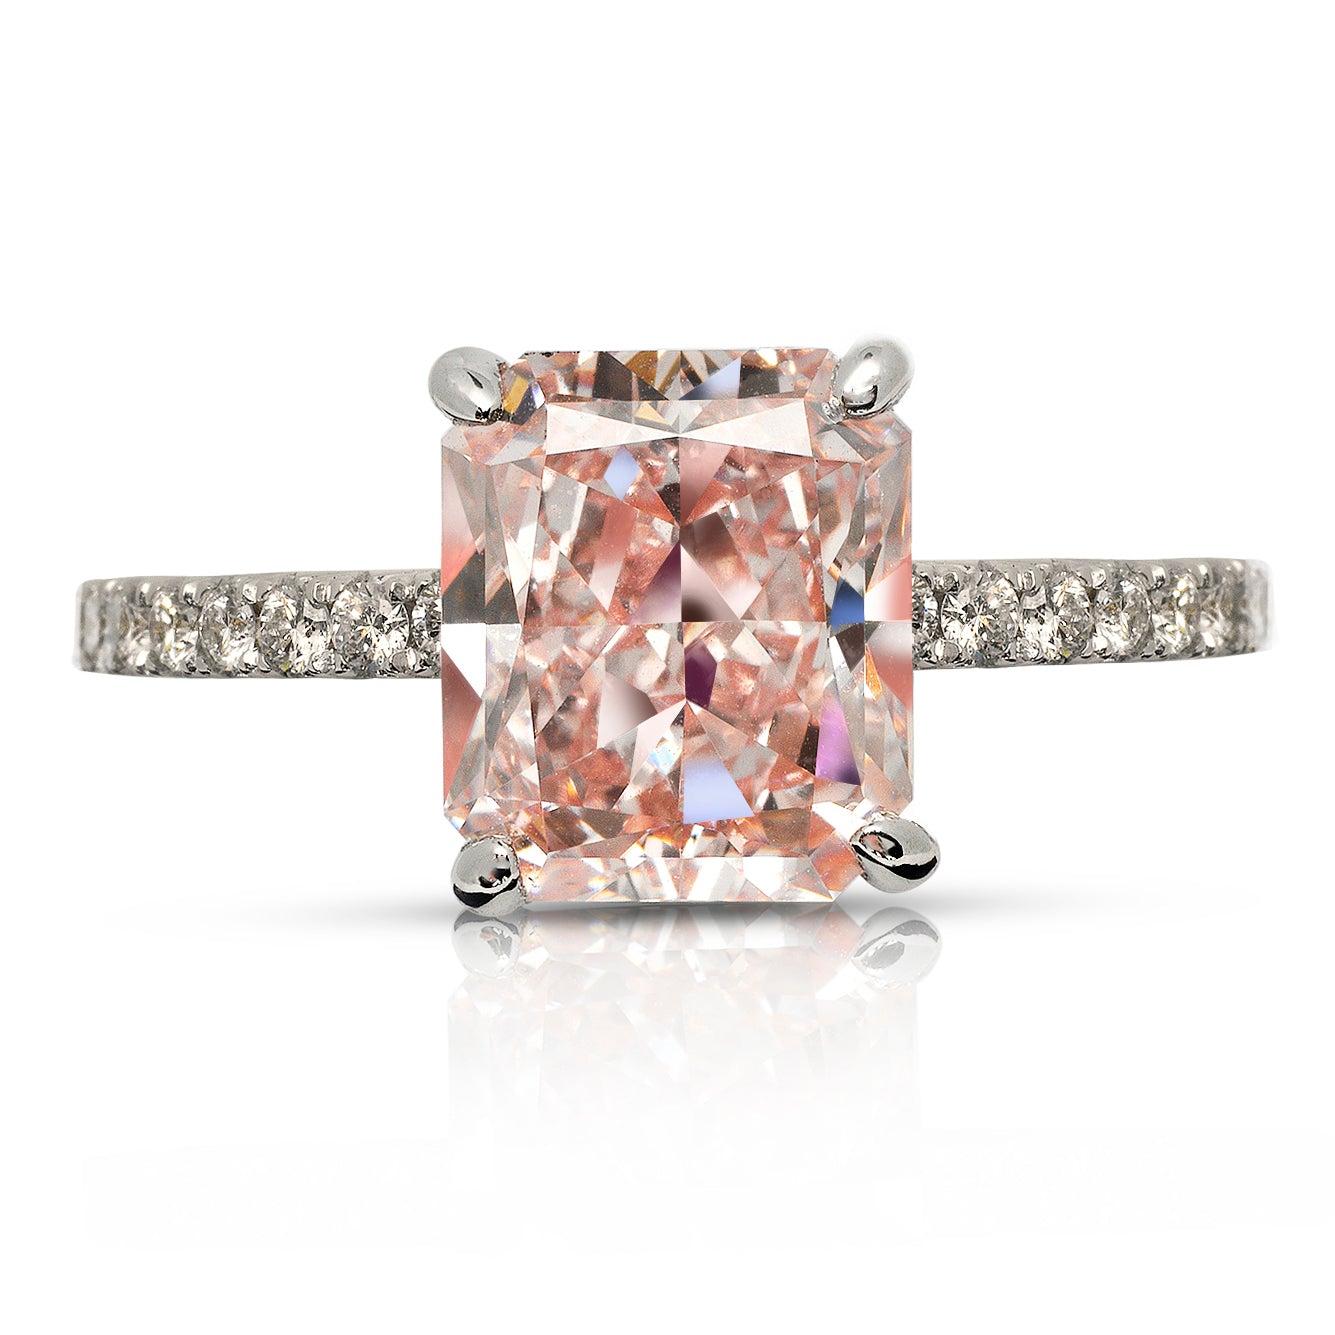 BALLET -RADIANT CUT FANCY INTENSE PINK DIAMOND ENGAGEMENT RING BY MIKE NEKTA
GIA CERTIFIED

Center Diamond:
Carat Weight: 3 Carats
Color :FANCY INTENSE PINK* FIP
Clarity: VVS2
Style: RADIANT BRILLIANT
Approximate Measurements: 8.6 x 7.3 x 5.0 mm
*